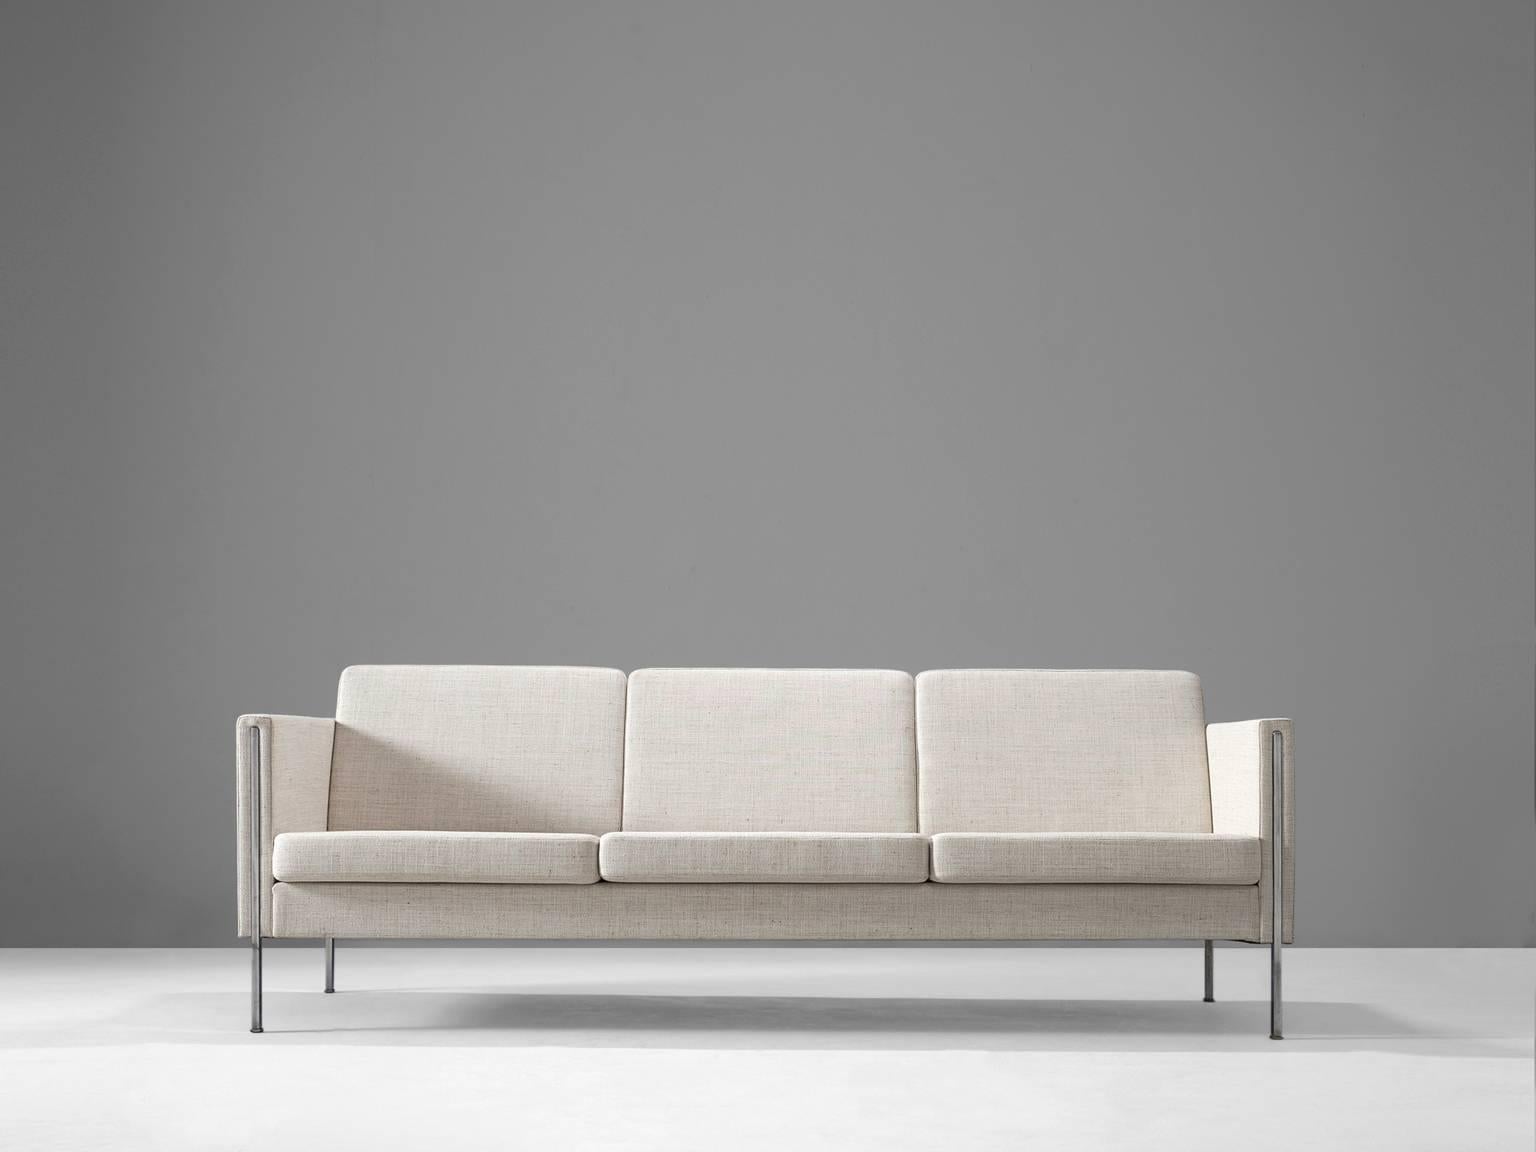 Sofa model '442,' in fabric and stainless steel, by Pierre Paulin for Artifort, France/Netherlands 1962. 

This comfortable three seater sofa show elegant stainless steel details. The combination of stainless steel and the light colored fabric